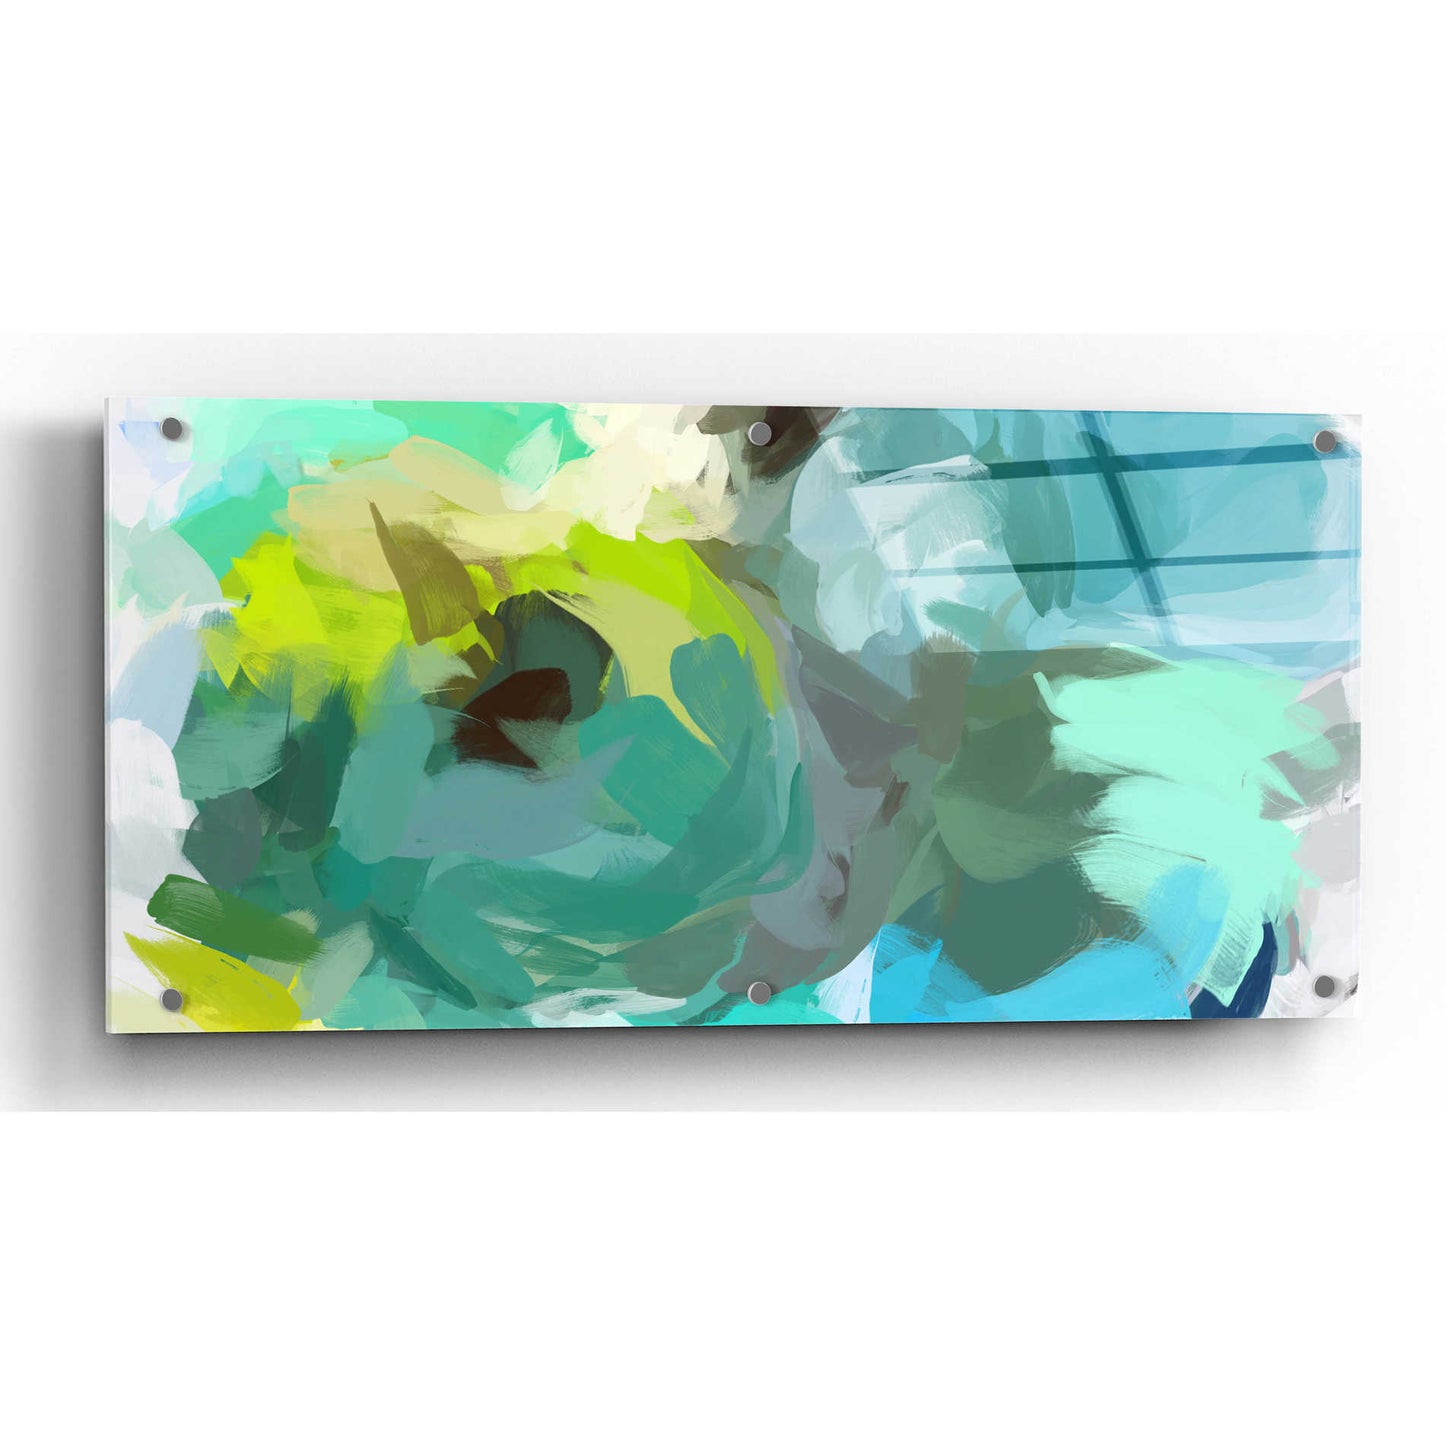 Epic Art 'The Shades of Green Abstract 2' by Irena Orlov,  Acrylic Glass Wall Art,24x12